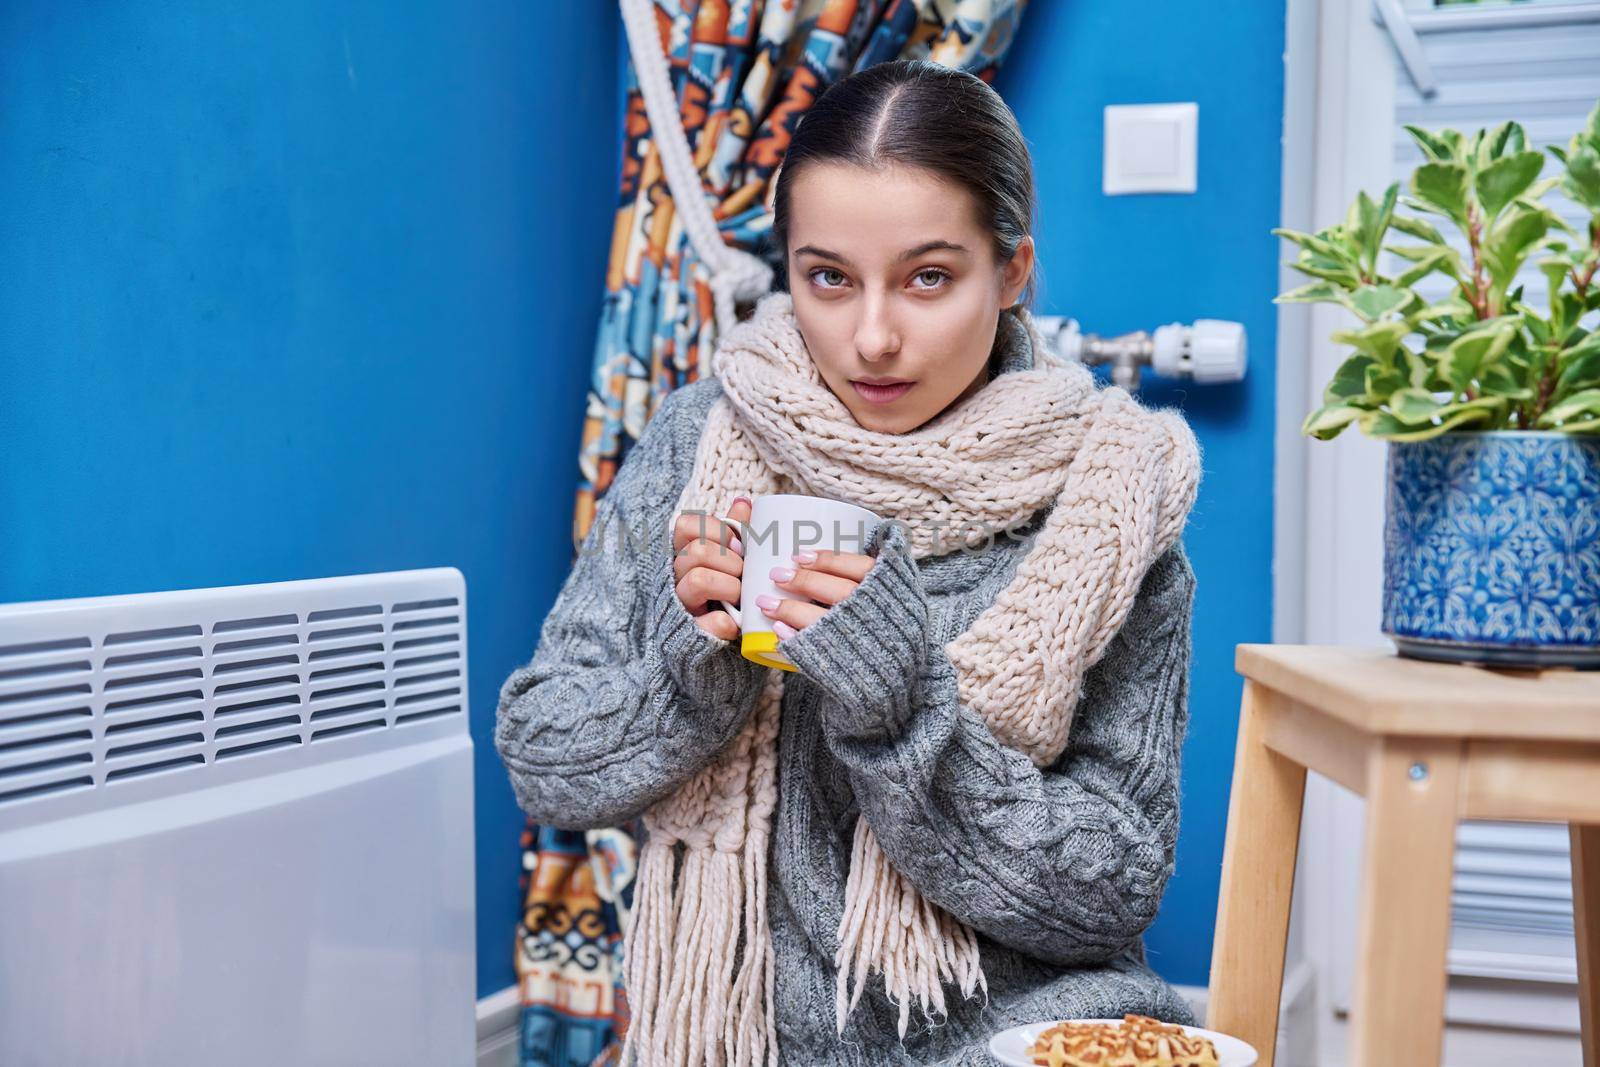 Cold autumn winter season, lifestyle, teenage female in warm sweater scarf warming near electric heating radiator, drinking hot drink with cup. Heating, warmth, equipment, life in cold season